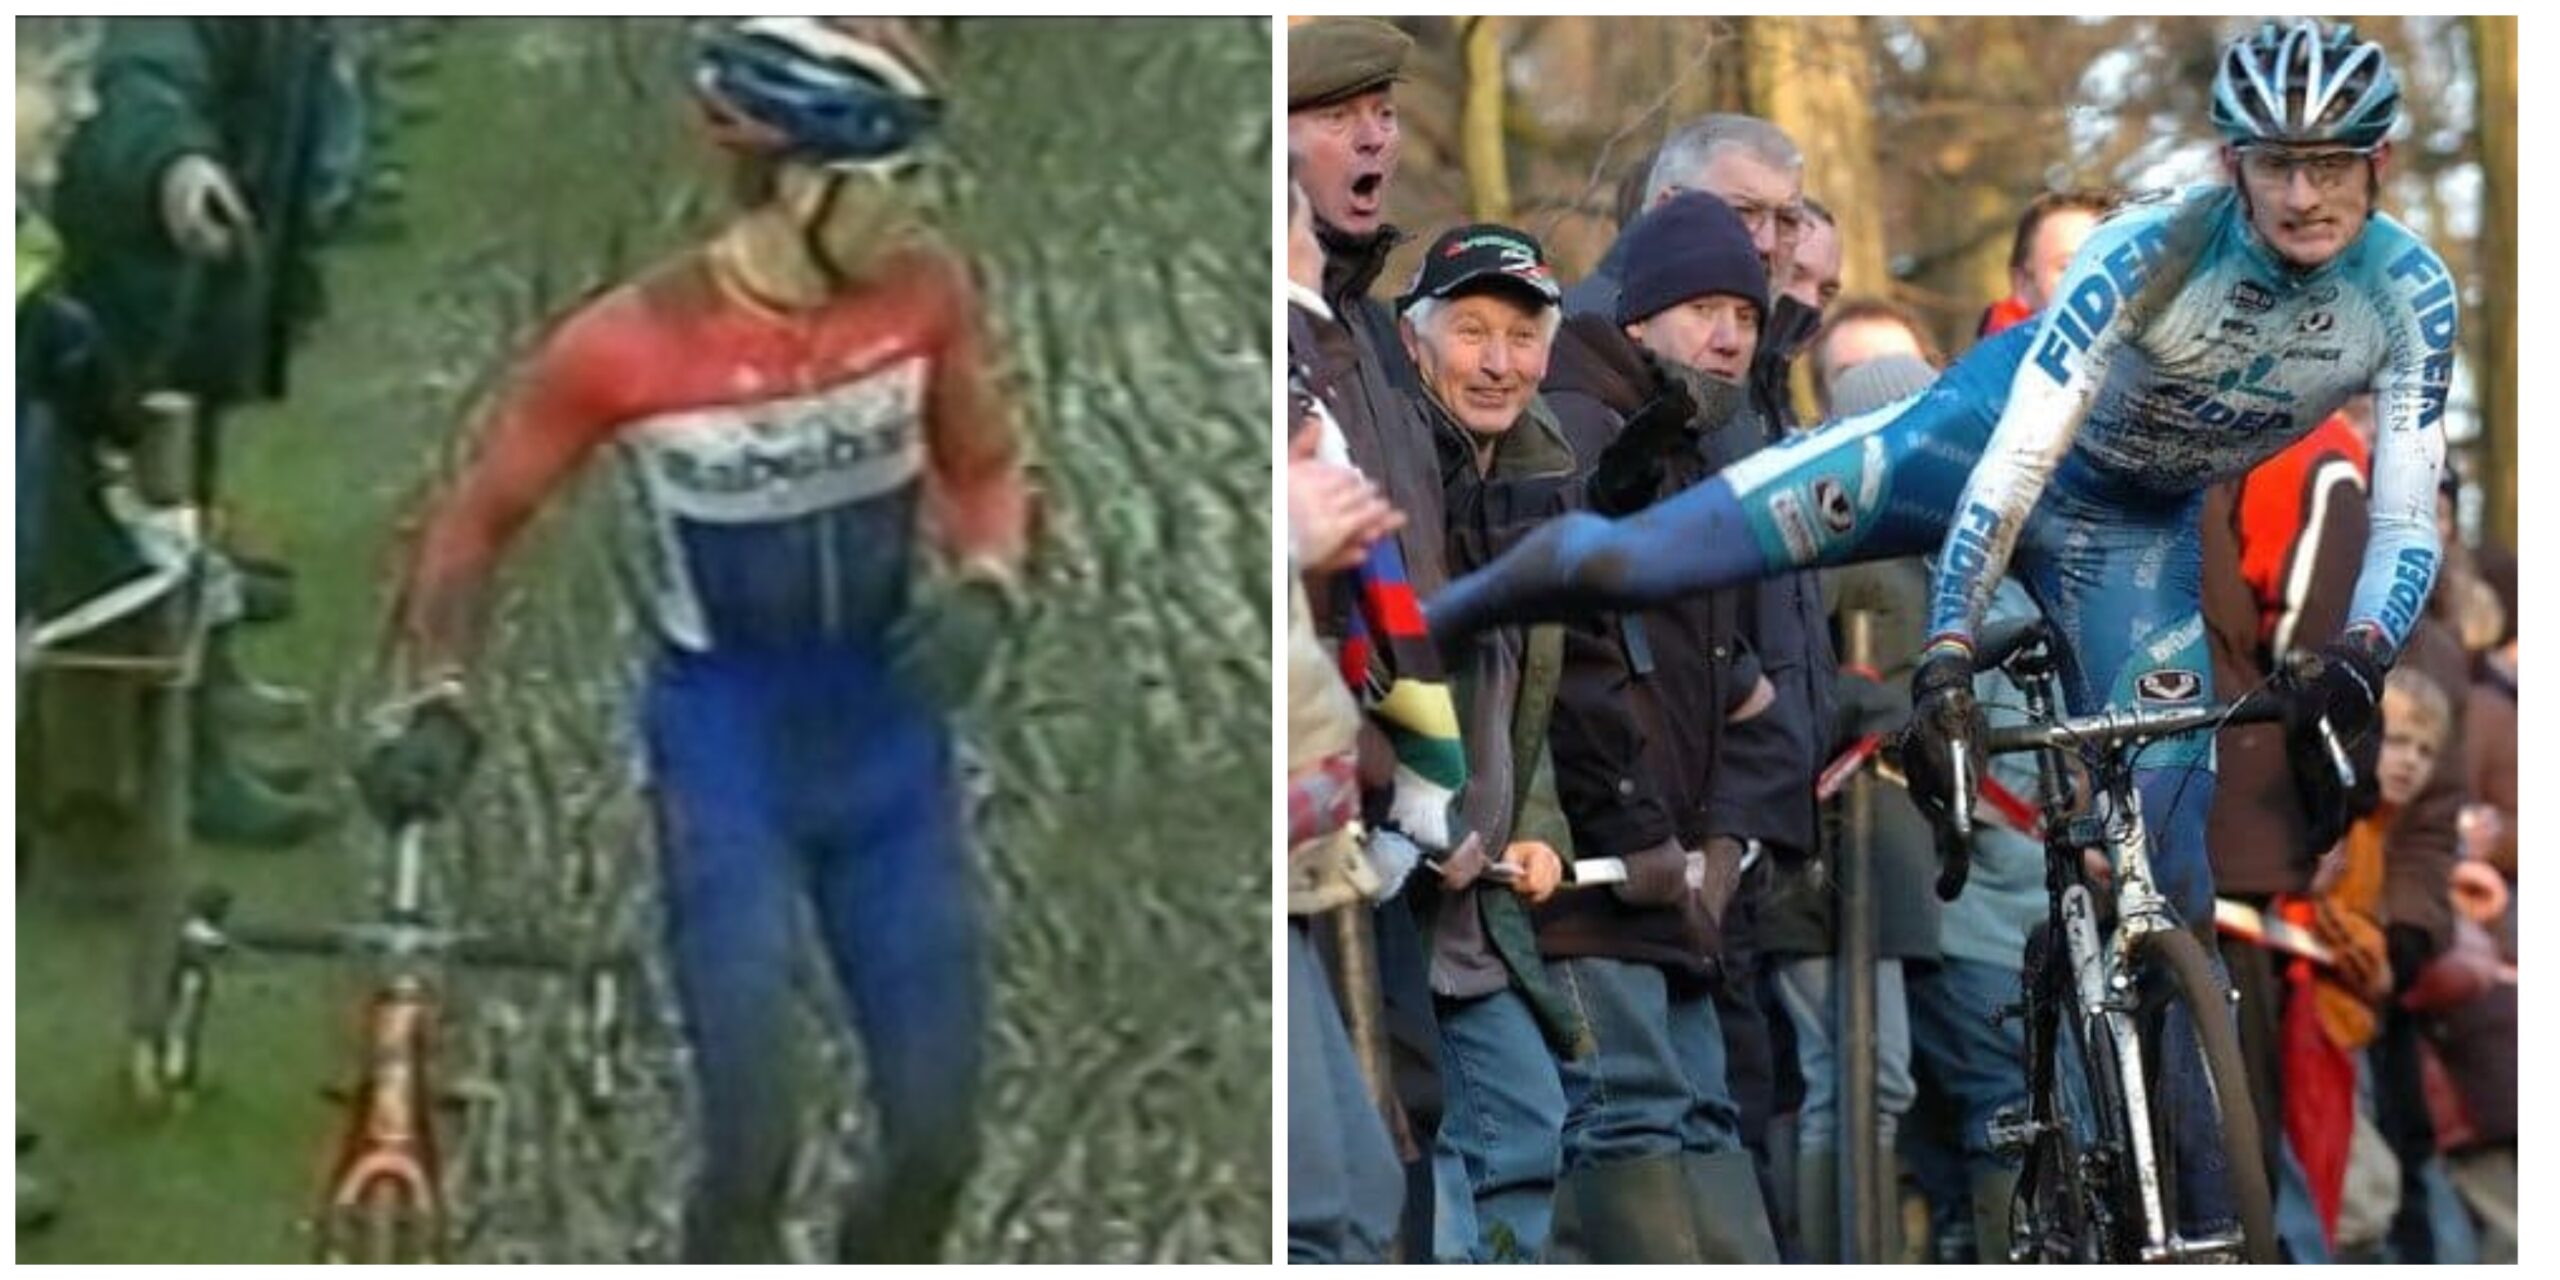 Cyclocross riders who chased, punched and kicked spectators | Video